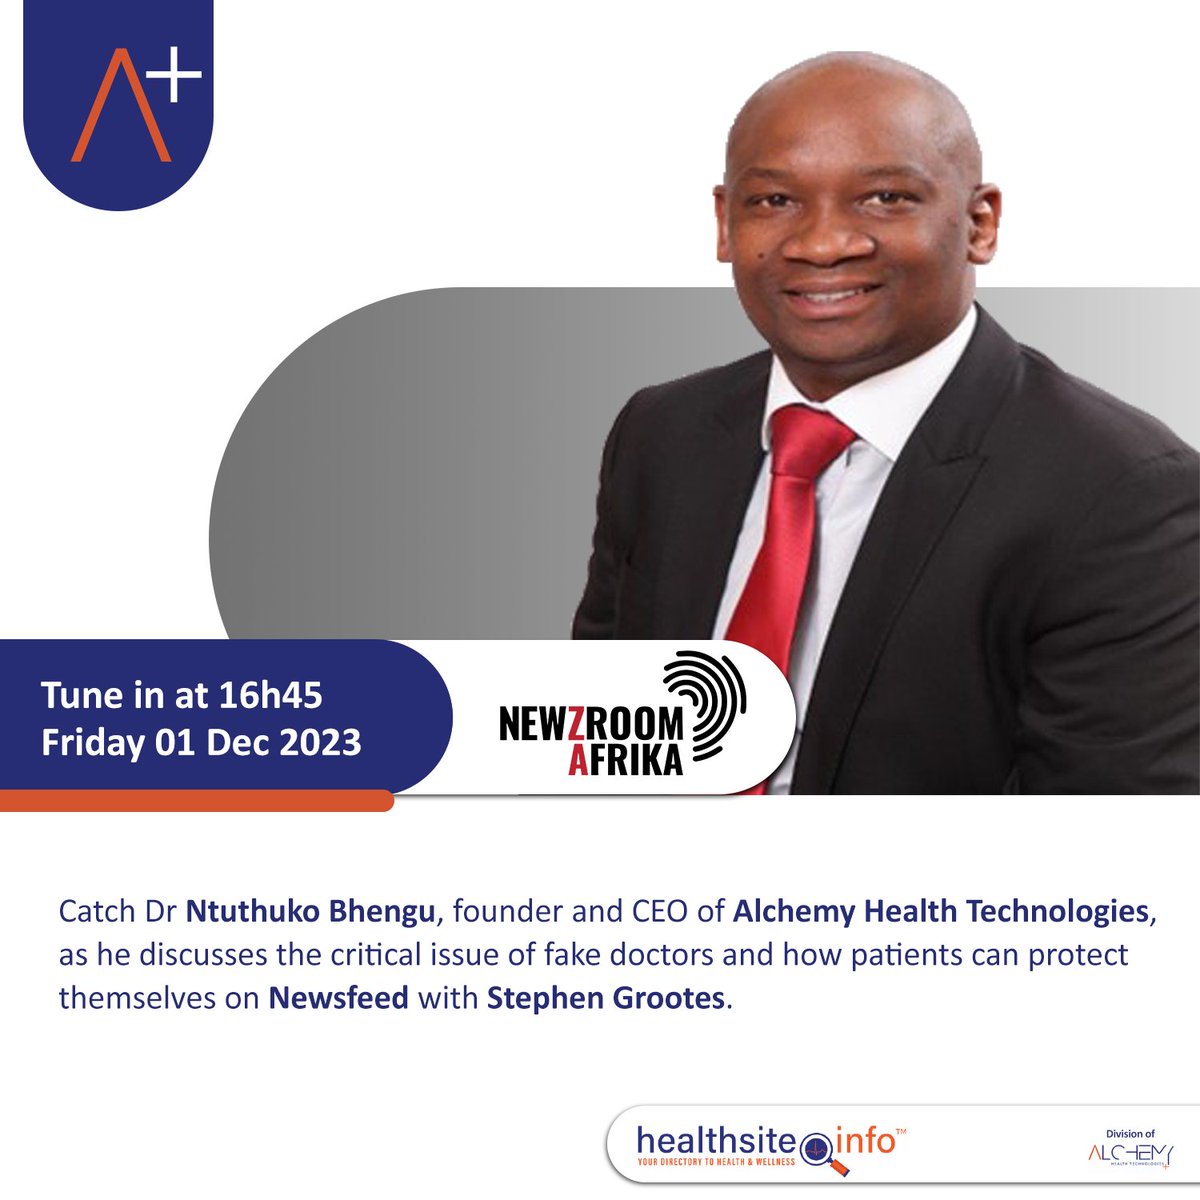 Catch @N22koBhengu, on @Newzroom405 #NewsFeed with @StephenGrootes as they discuss #bogusdoctors and how patients can protect themselves. On Friday the 1st of December at 16h45. #alchemyhealth #healthsite.info #Newzroom405 #NewsFeed #hpcsa